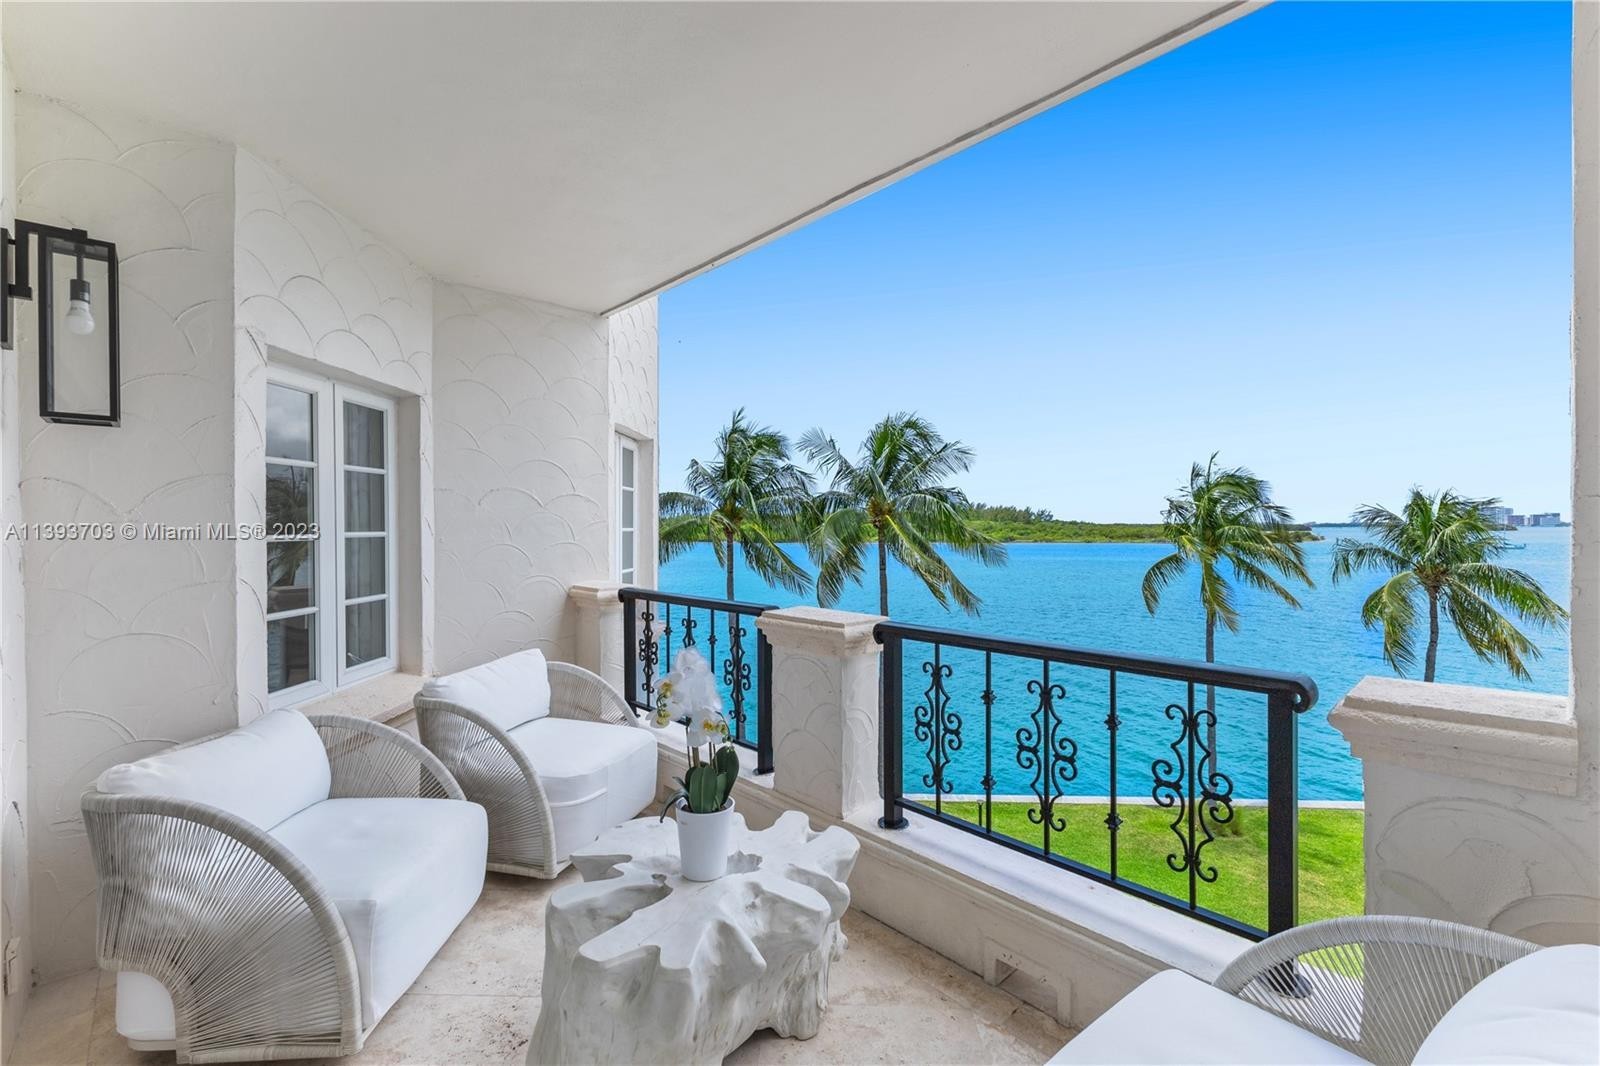 37. 2436 Fisher Island Dr